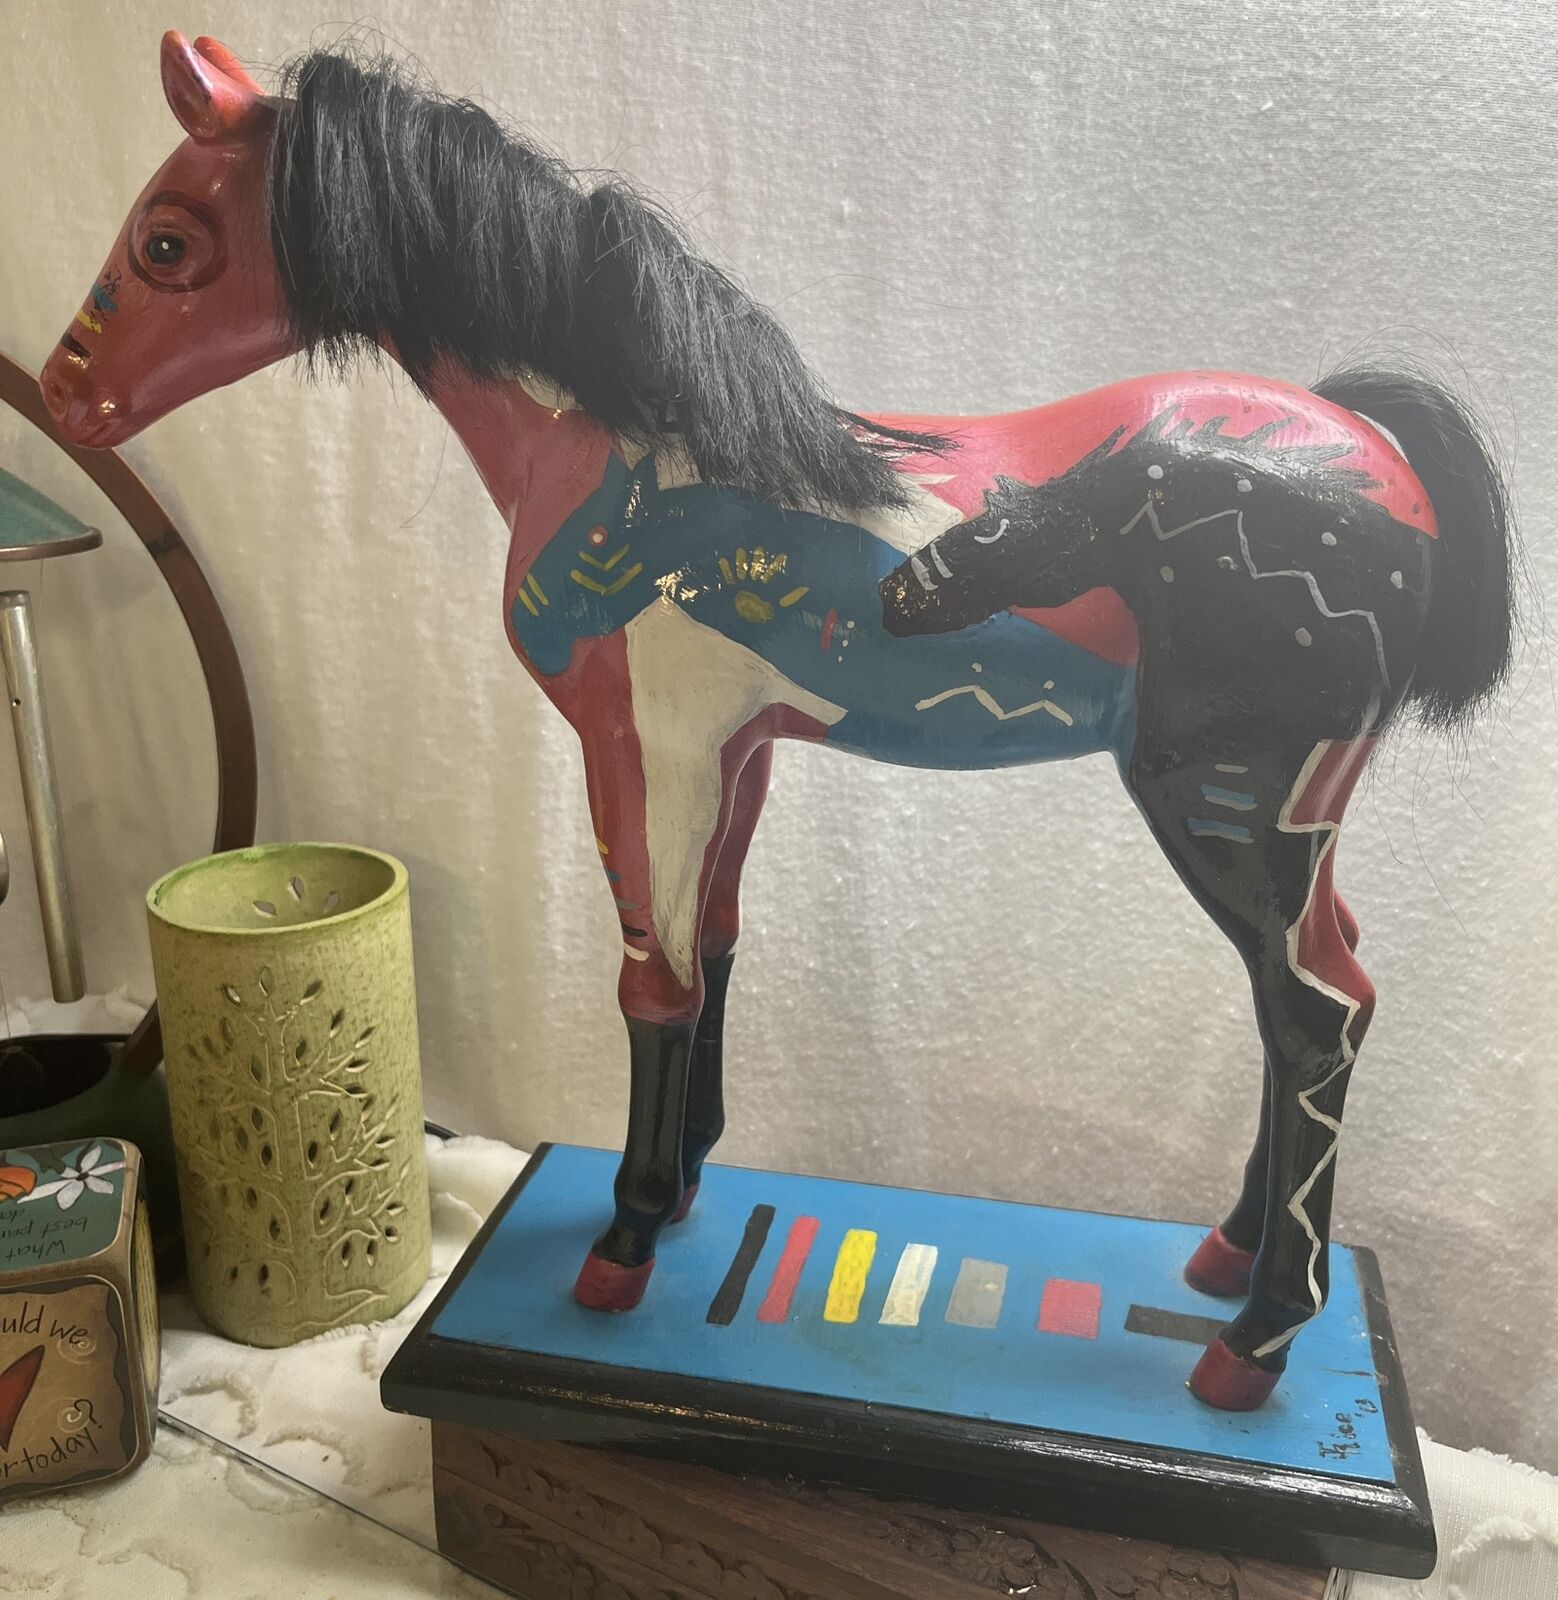 The Trail of Painted Ponies Signed J Rice 2013 Wooden